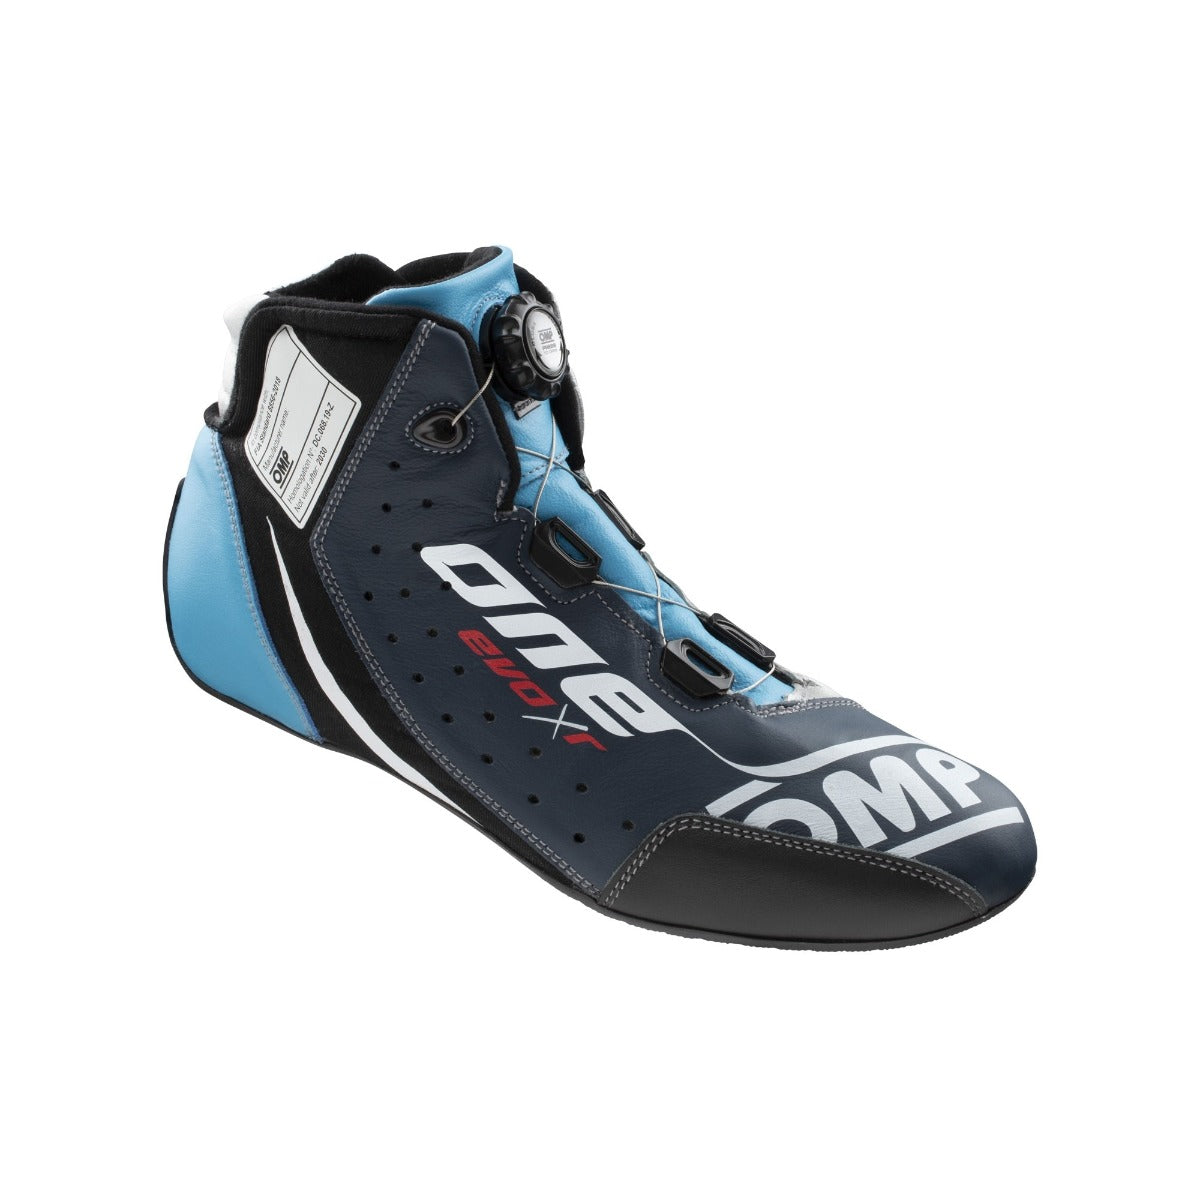 Image of OMP One Evo X R Nomex Race Shoe in black and light blue